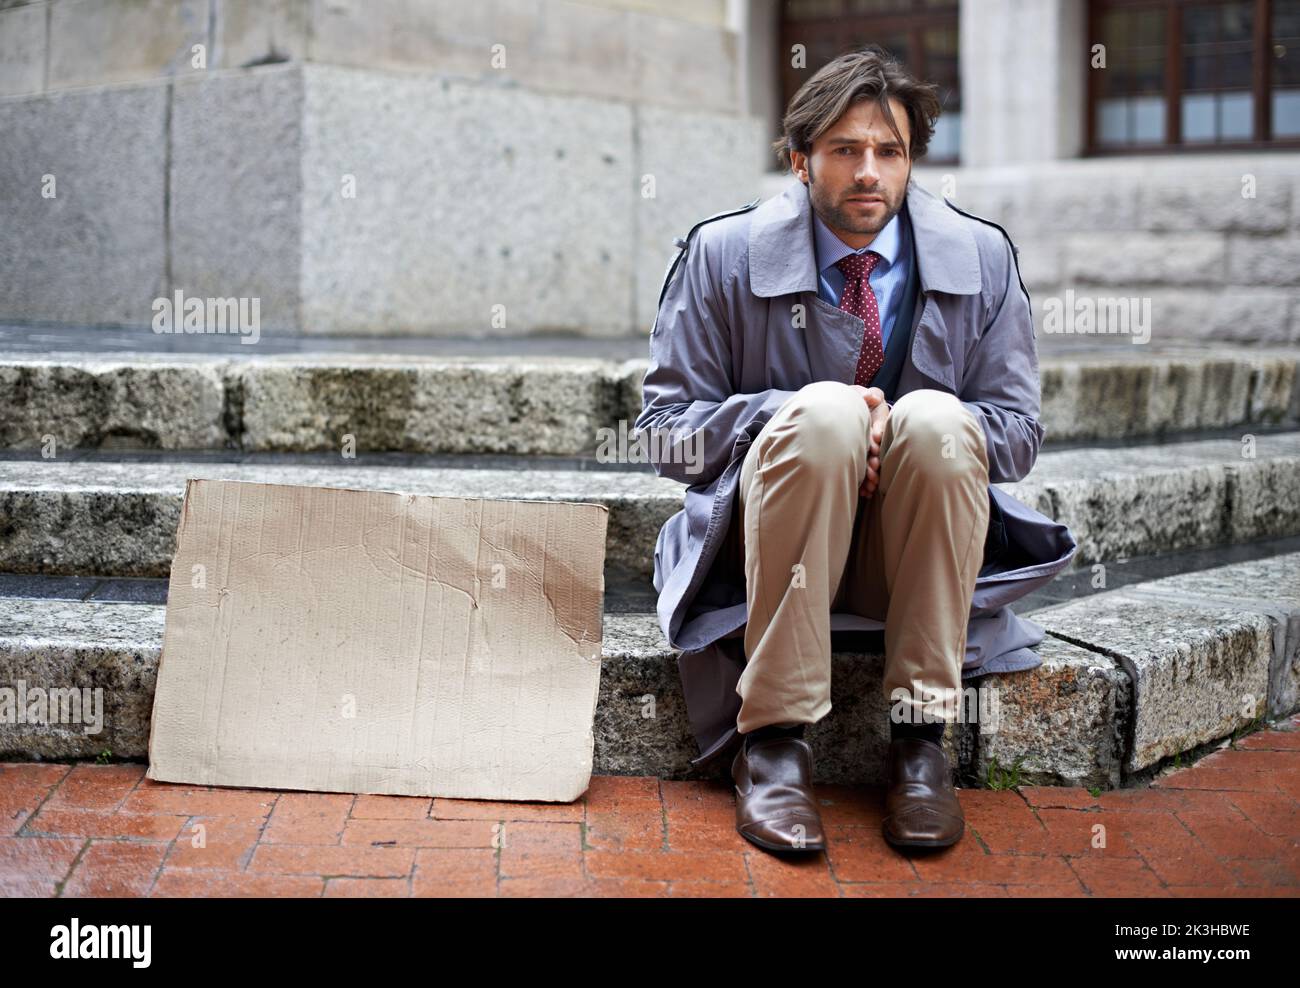 Will model for food. View of an unemployed businessman sitting on the steps begging for work. Stock Photo